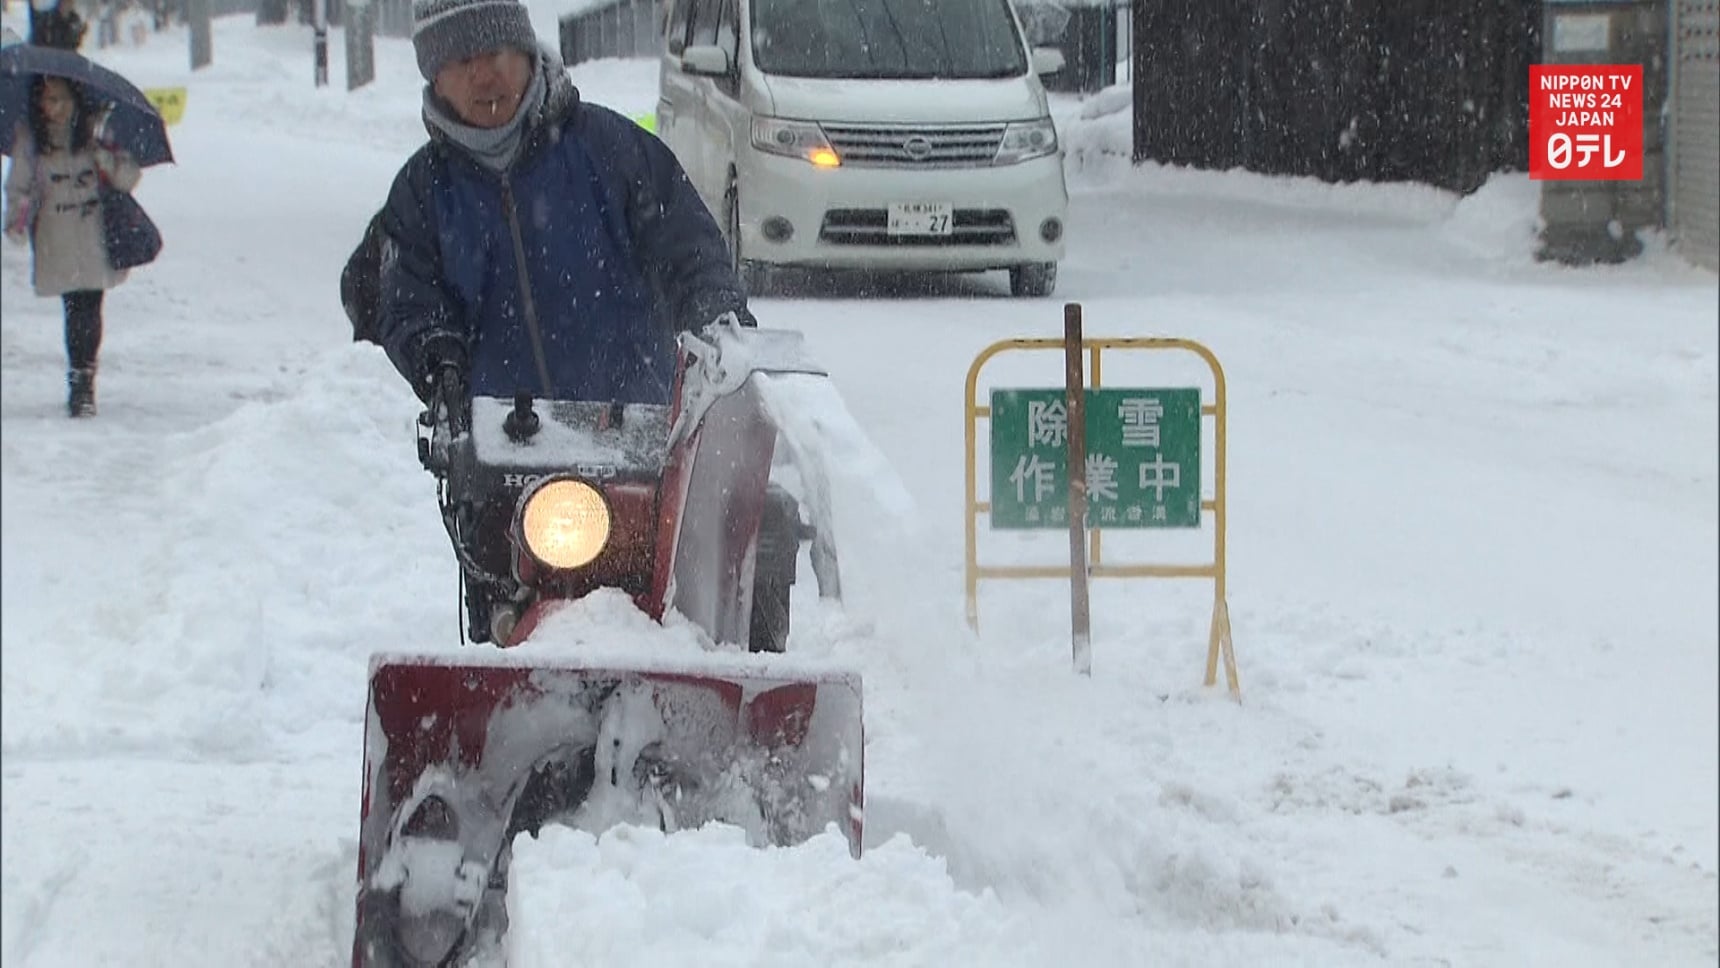 Hokkaido Receives Largest Snowfall This Winter All About Japan